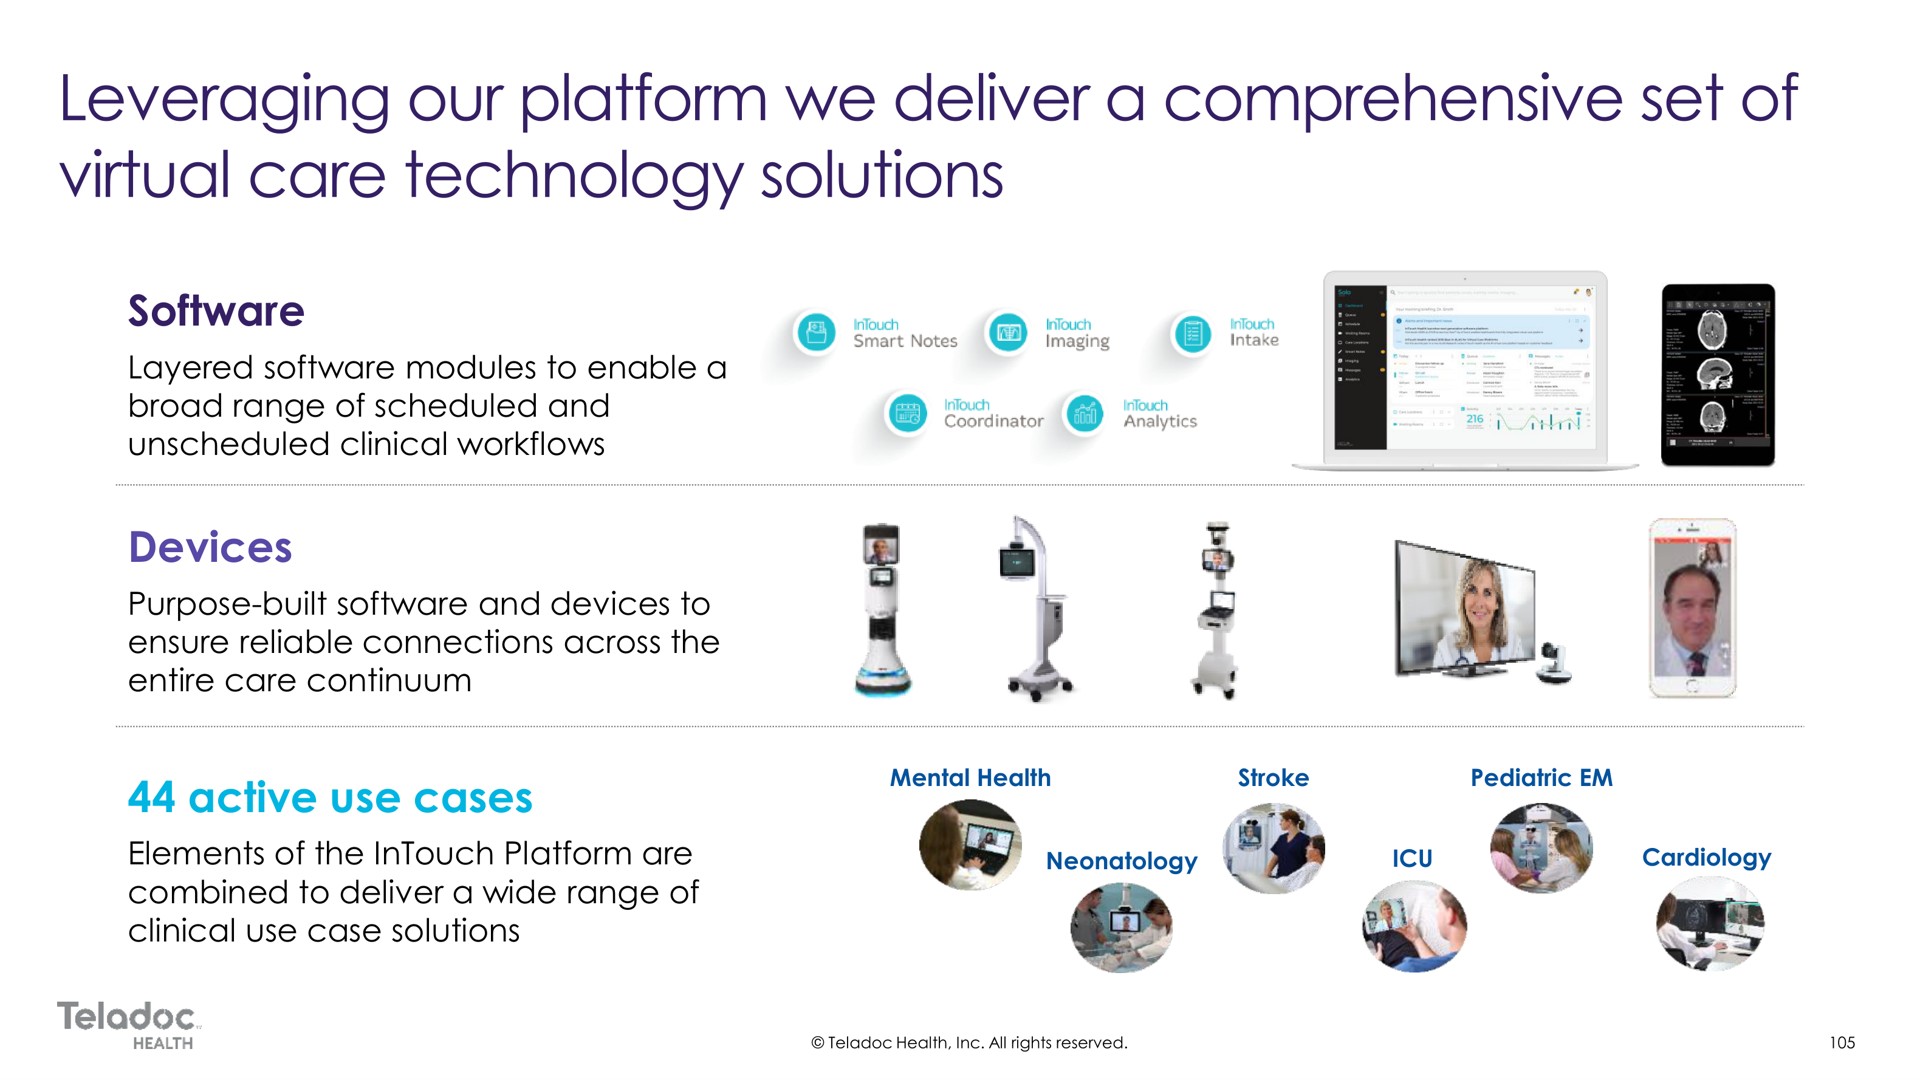 layered modules to enable a broad range of scheduled and unscheduled clinical devices purpose built and devices to ensure reliable connections across the entire care continuum active use cases elements of the platform are combined to deliver a wide range of clinical use case solutions leveraging our we comprehensive set virtual technology | Teladoc